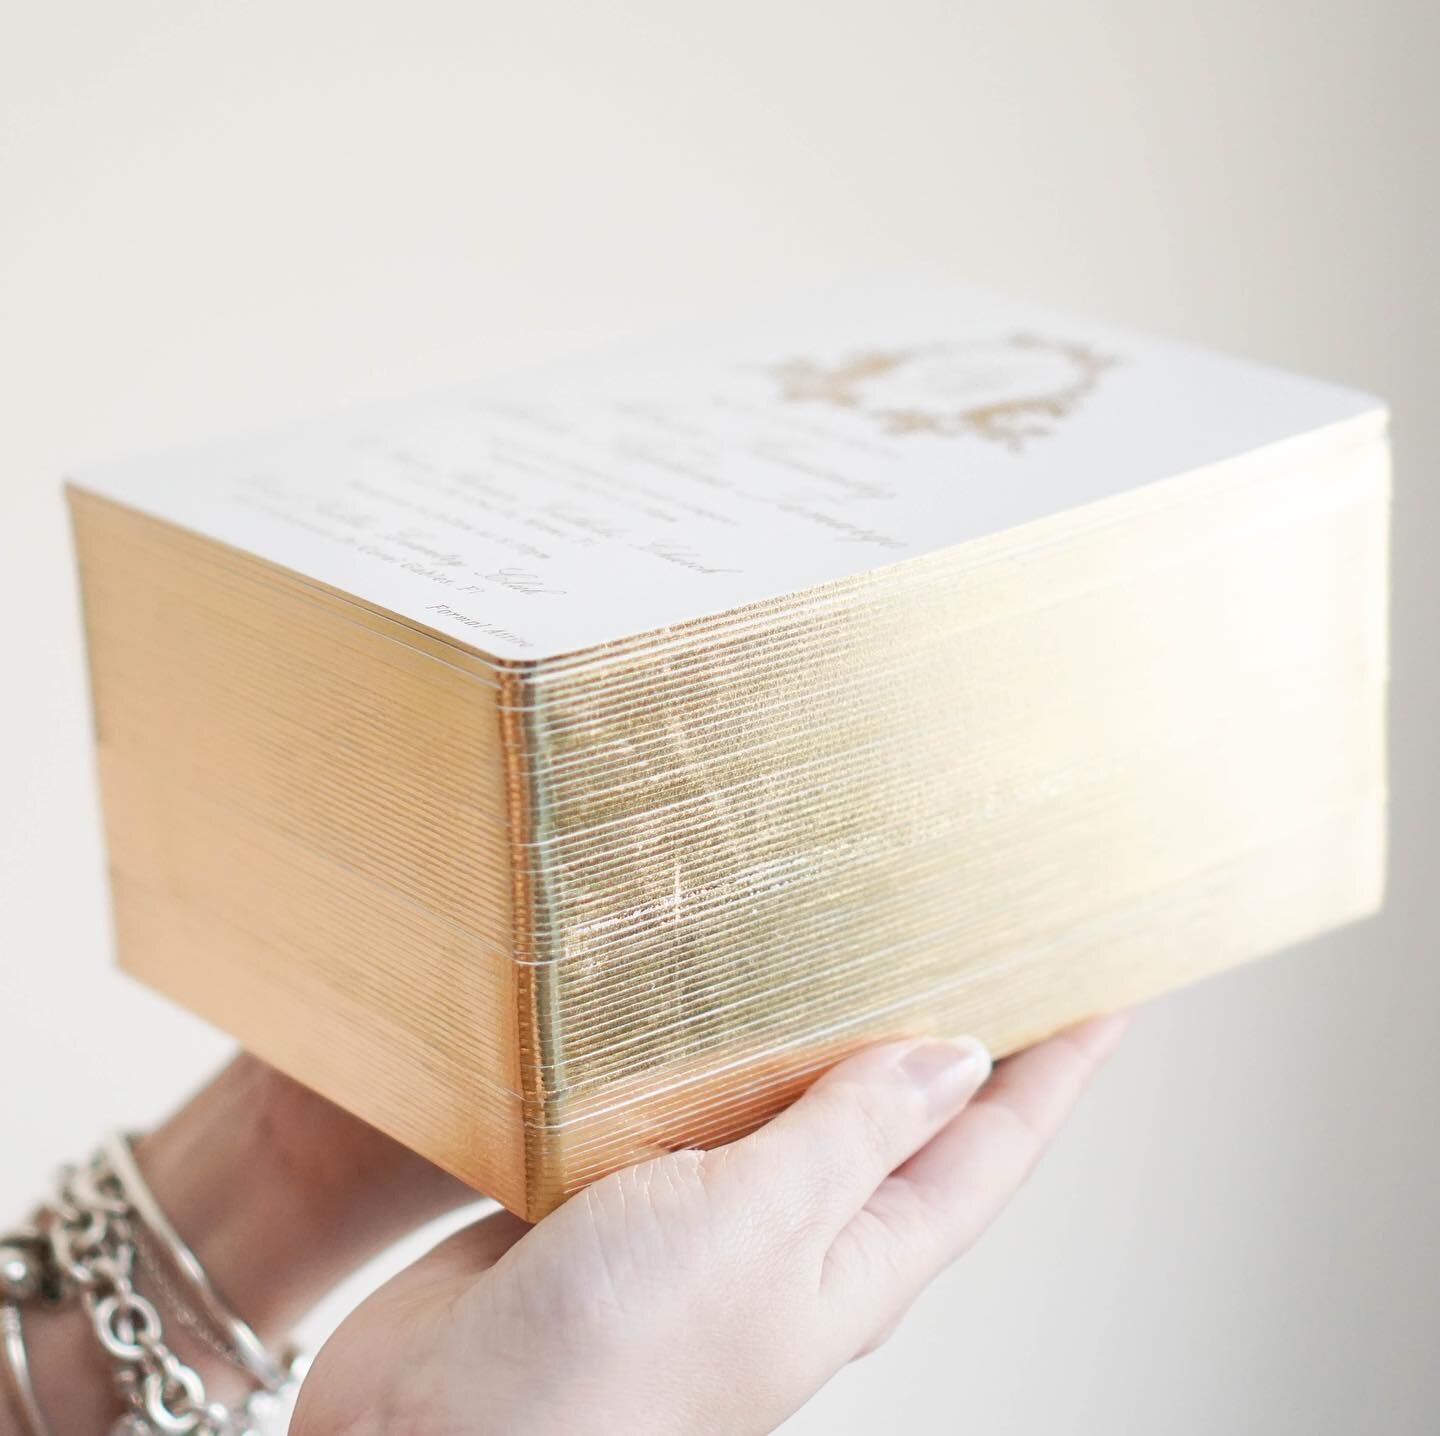 Can it get more impressive than this?⁣
⁣
If you want to impress your guests, we have got just the thing for you!⁣
Luxuriously triple-thick cardstock (900gsm/330lbs!), press-printed and edged with Metallic Gold Foil.⁣
⁣
Invitations like this provide a